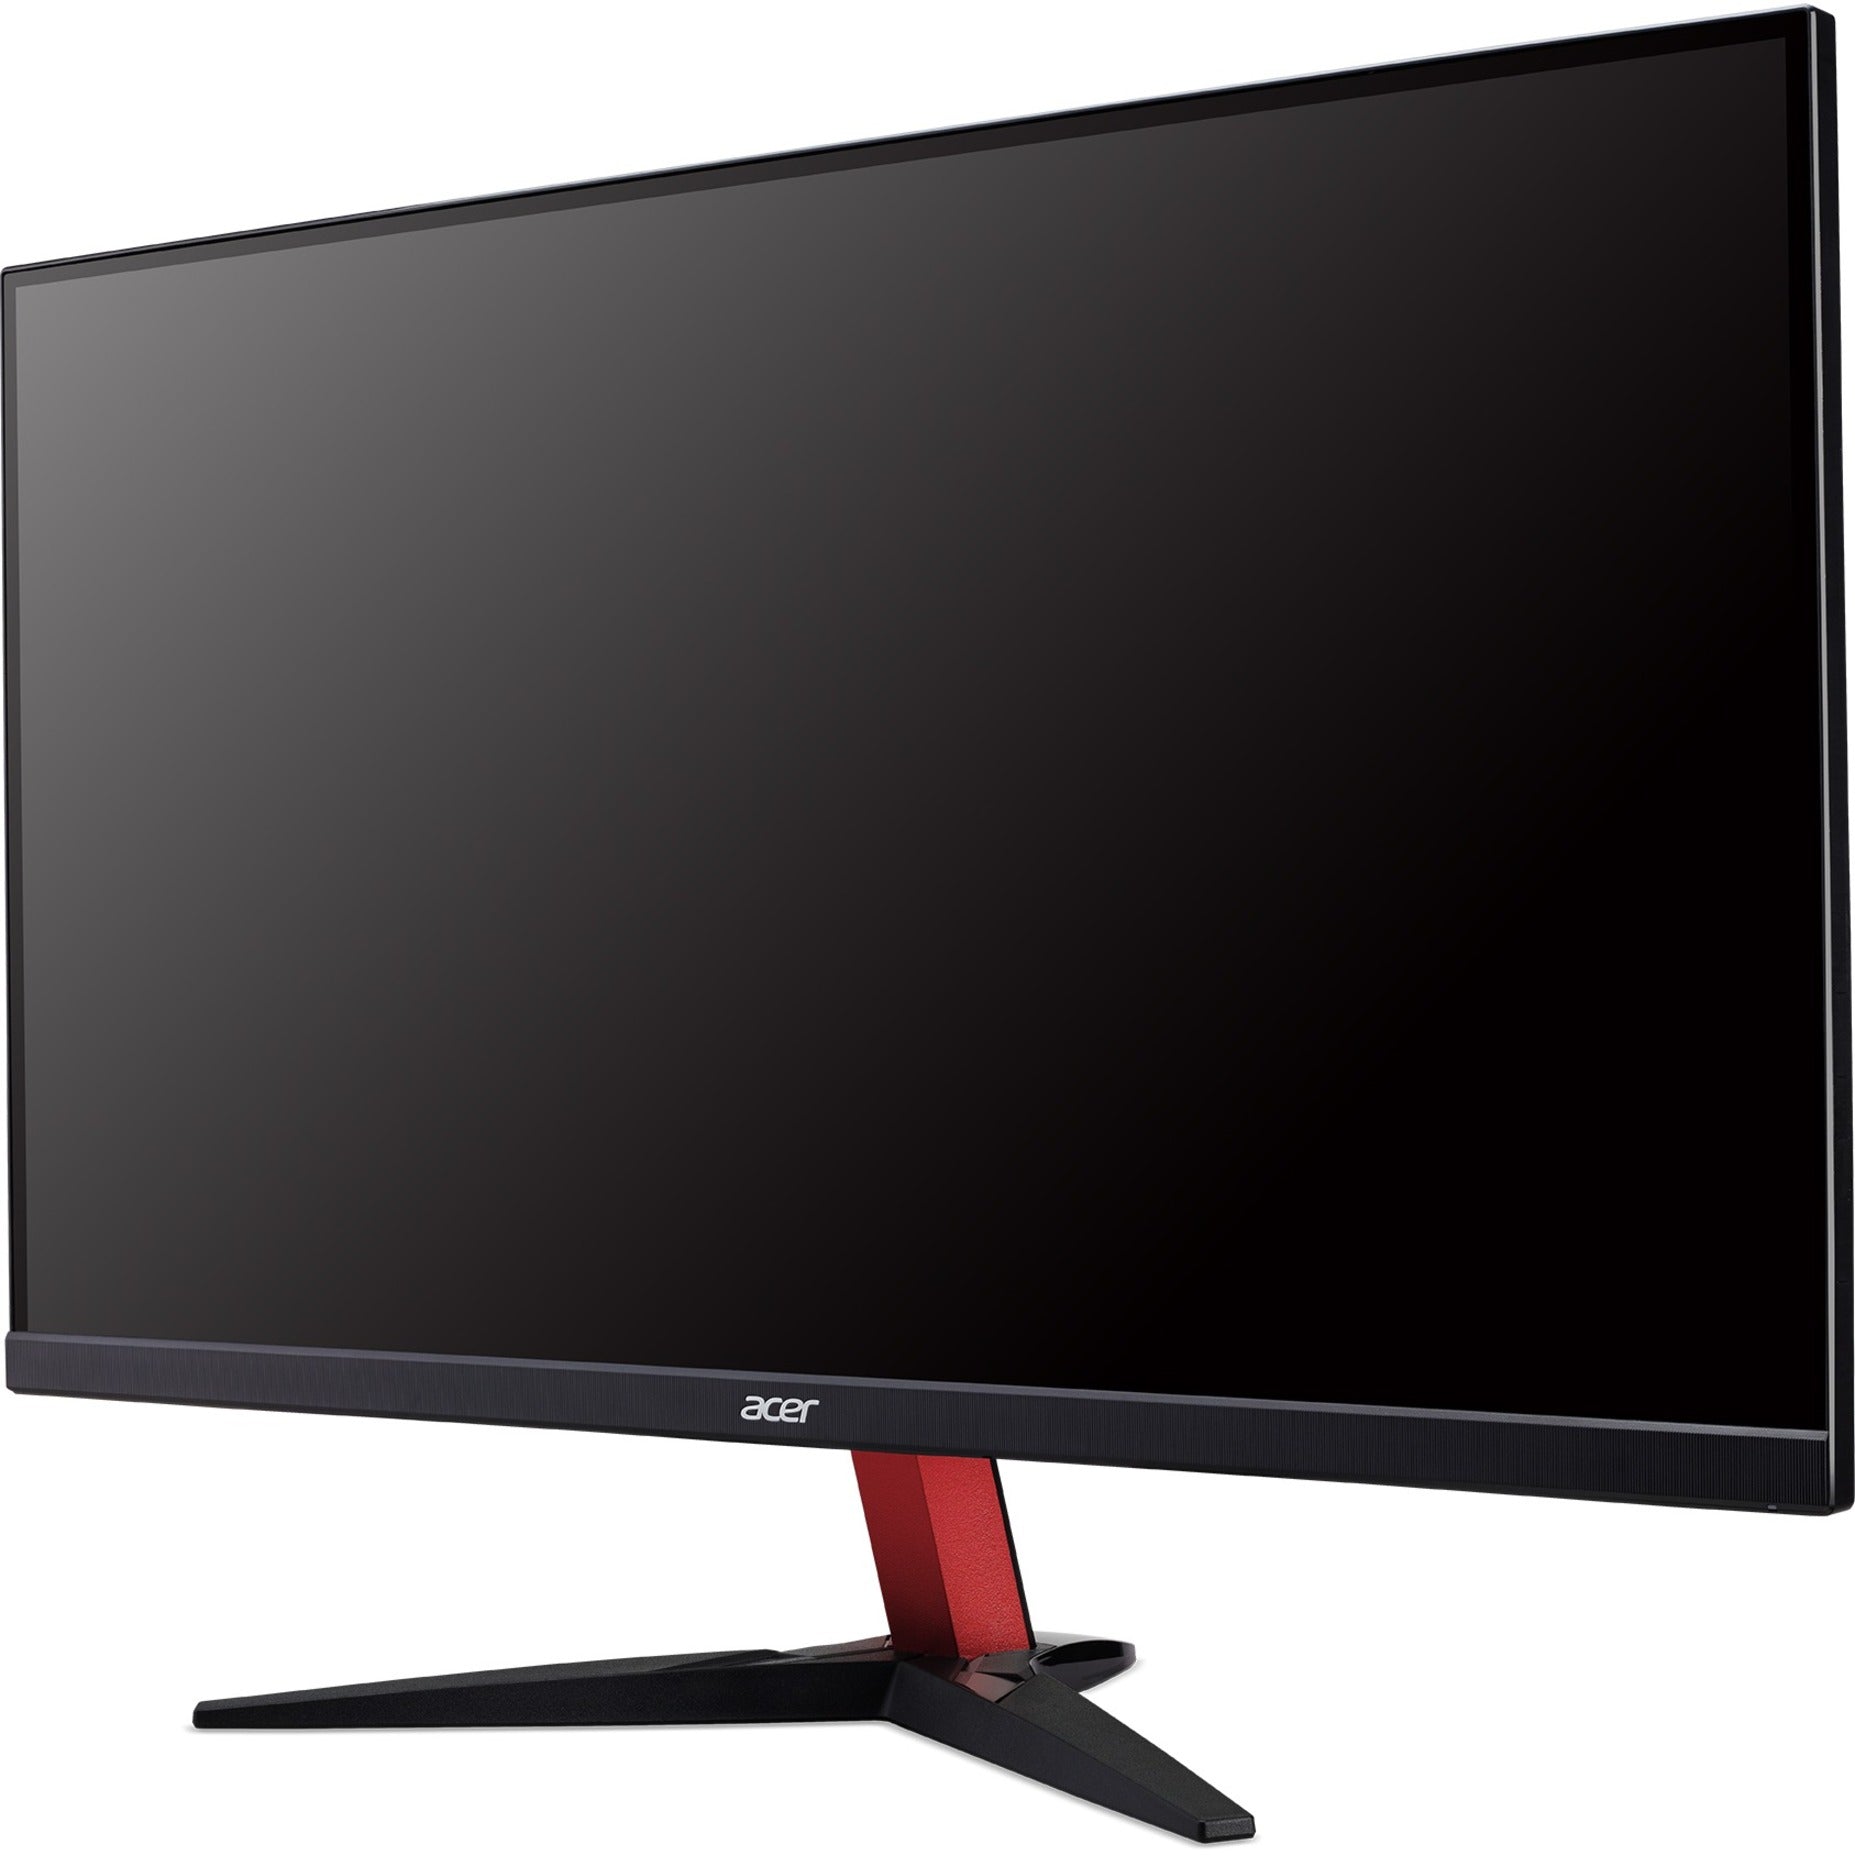 Acer KG272 S 27 Full HD LCD Monitor - Black [Discontinued]